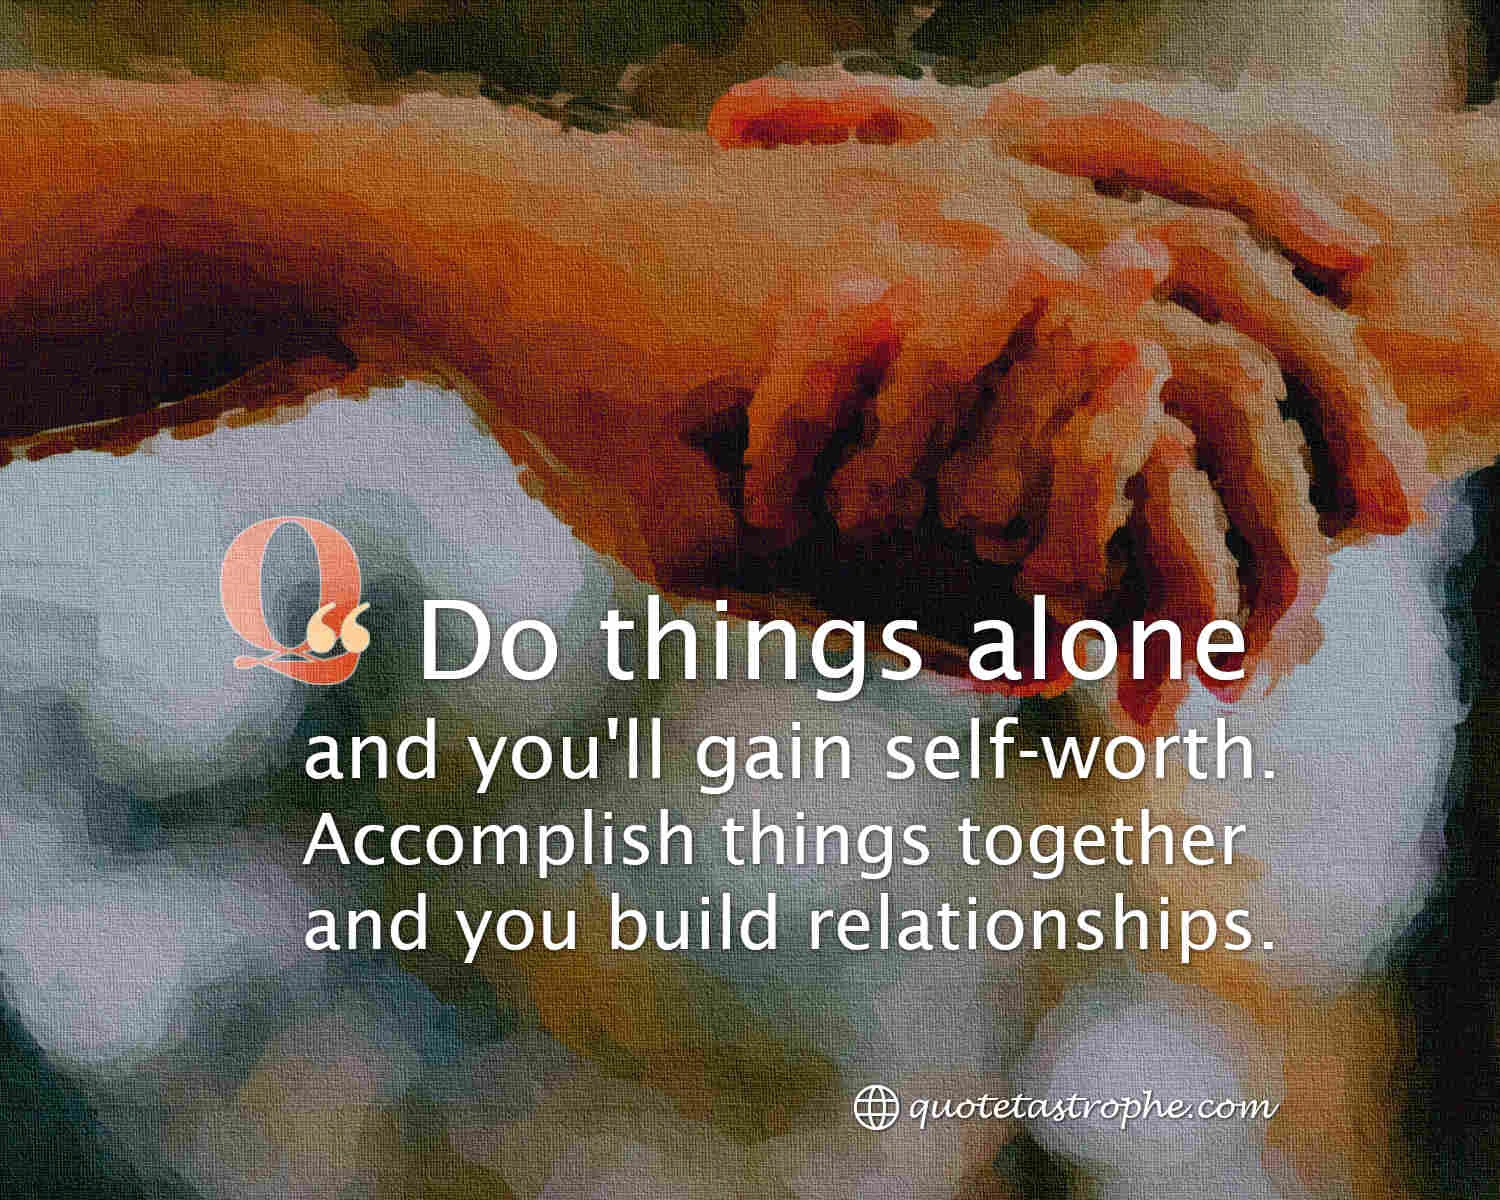 Do Things Alone And You'll Gain Self-Worth